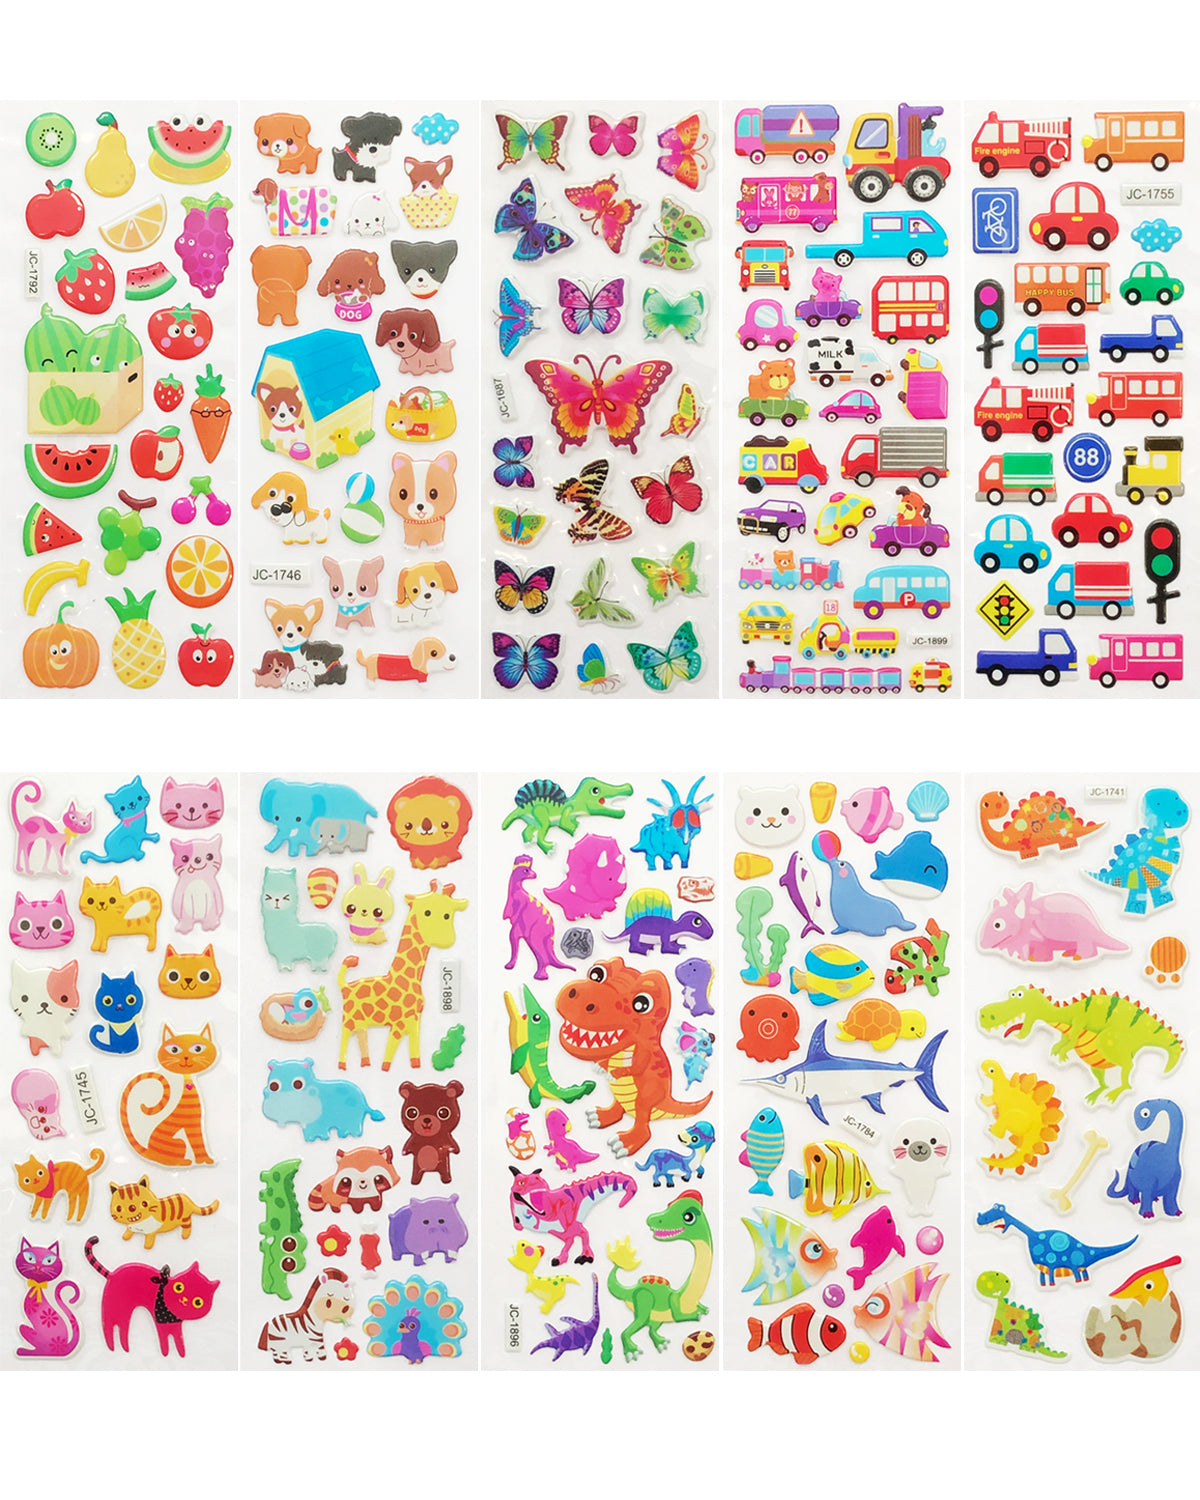 Wrapables 3D Puffy Stickers Bubble Stickers for Crafts & Scrapbooking (10 Sheets) Zoo Animals Kitties Doggies Owls